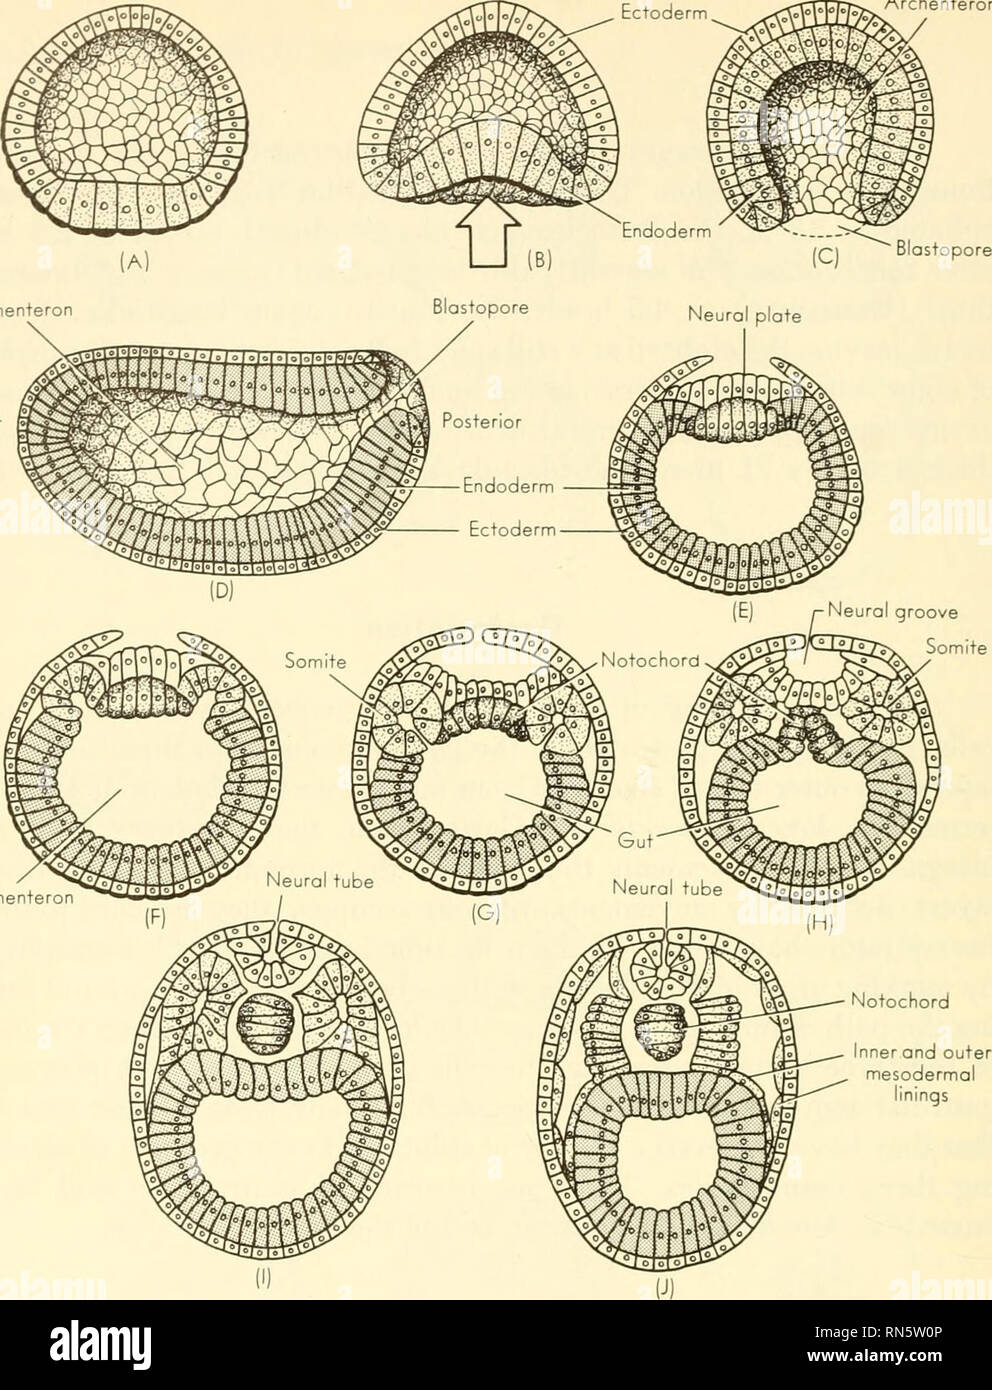 Animal growth and development. Embryology; Growth; Biology; Growth;  Embryology; Animals -- growth & development. nner and outer mesodermal  ngs Fig. 28. Gastrulation and later embryonic stages In Amphioxus (after  Villee). cells,